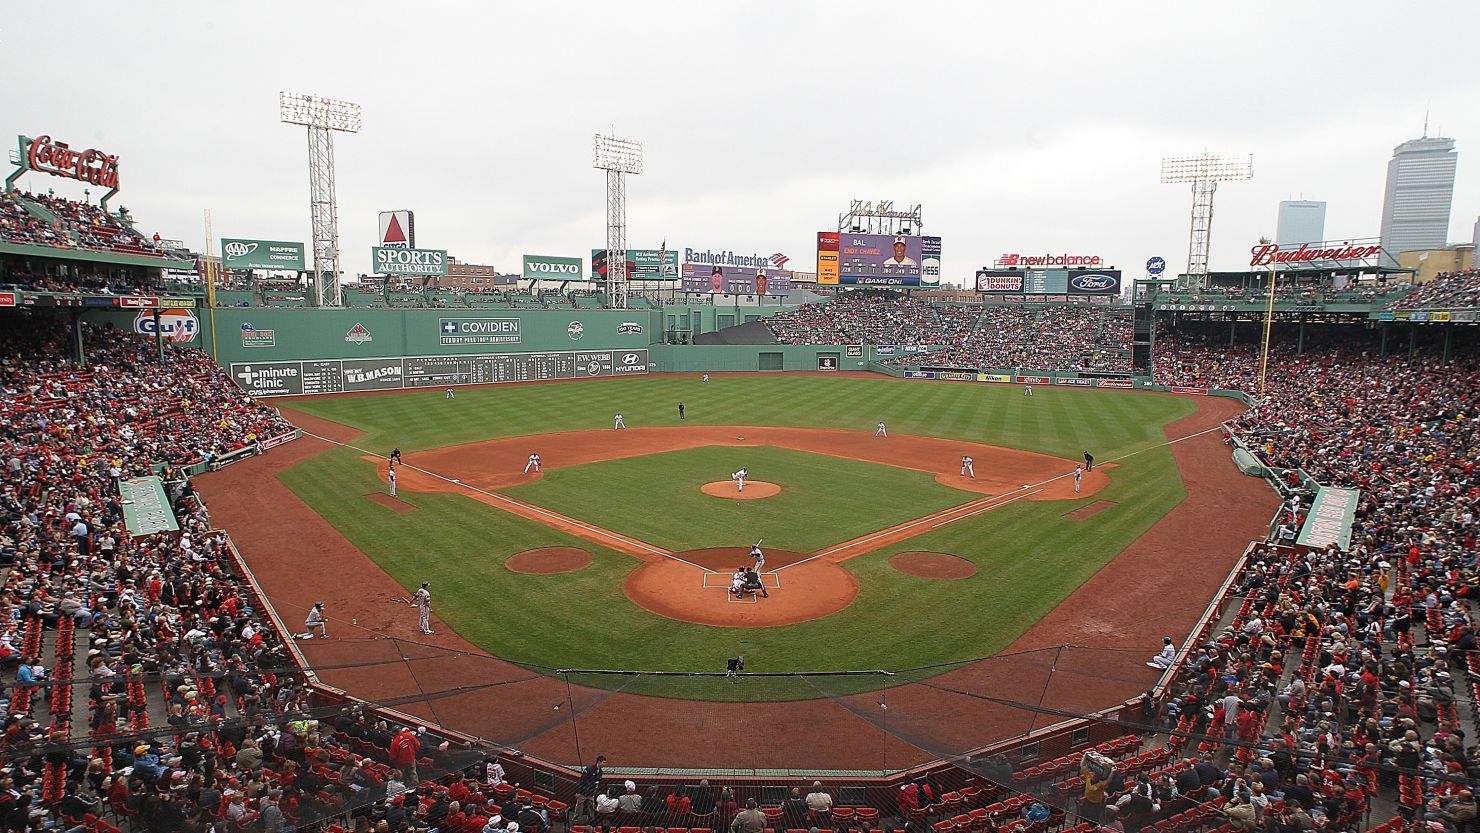 Carl Beane, known to baseball fans as "the voice of Fenway Park," has died.